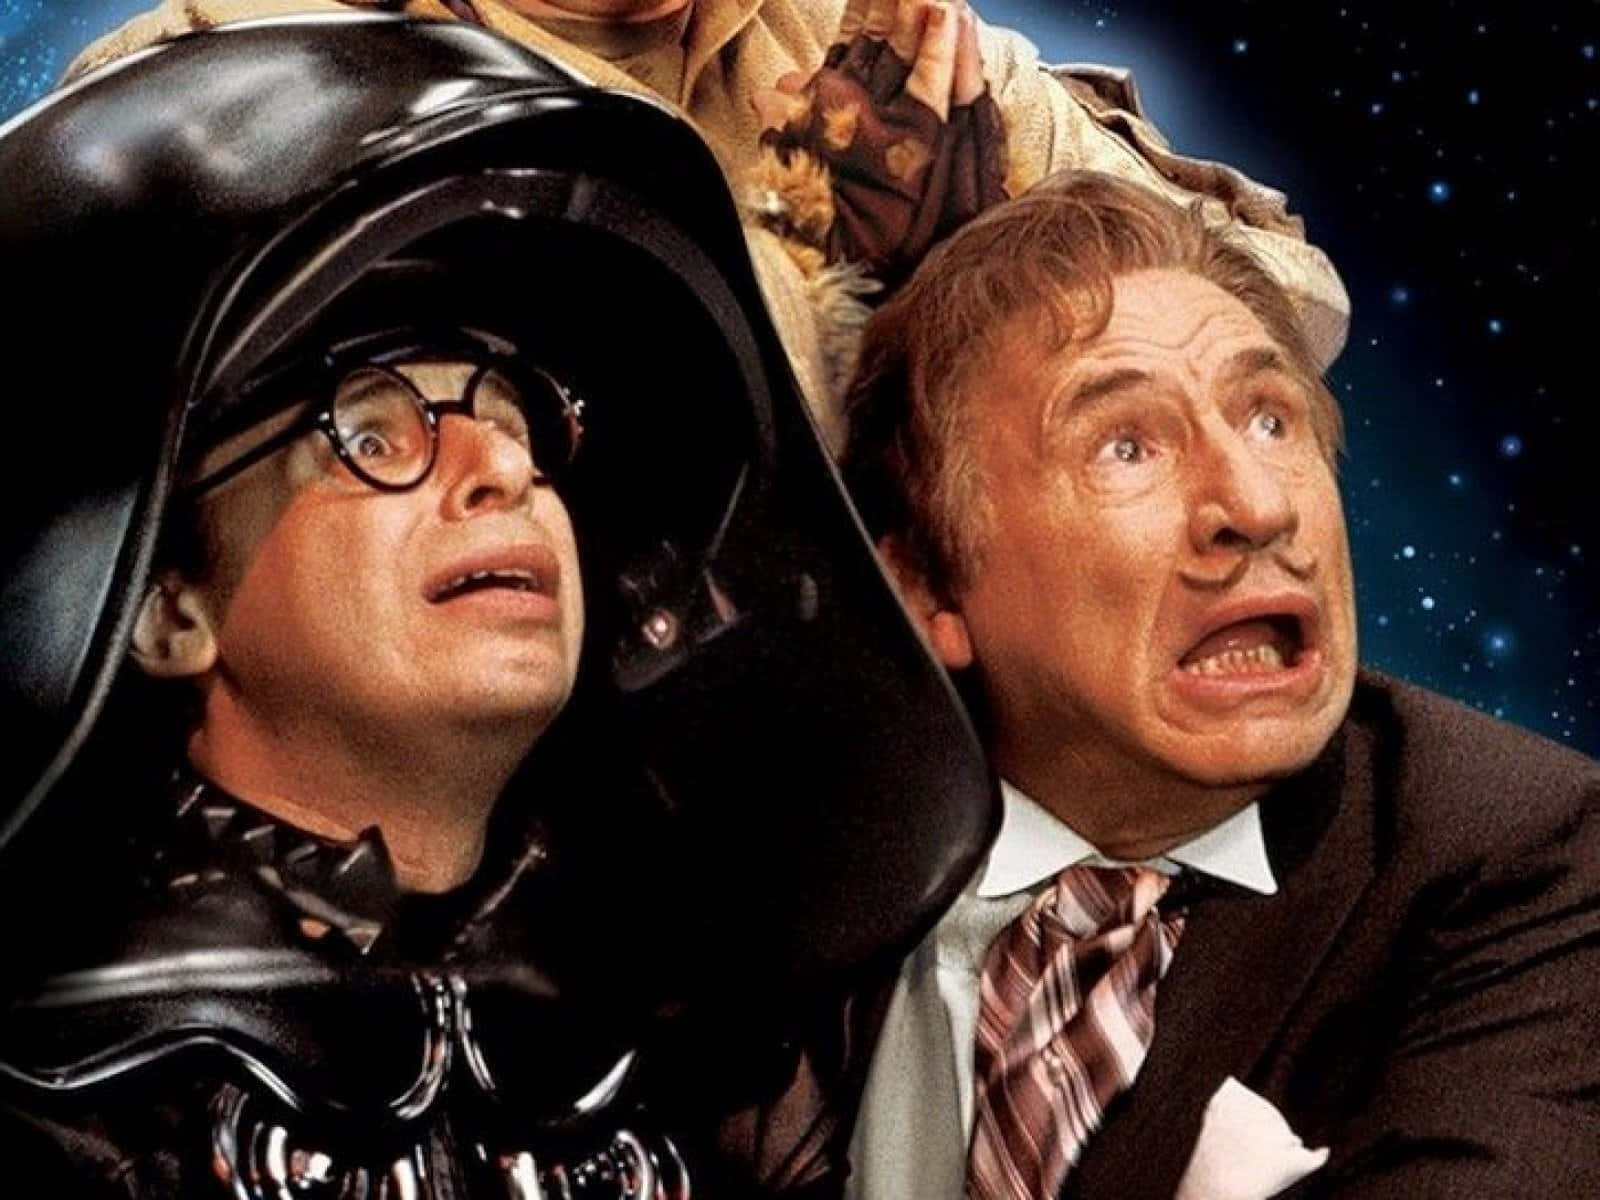 The Heroes Of Spaceballs, Ready For Their Next Adventure.